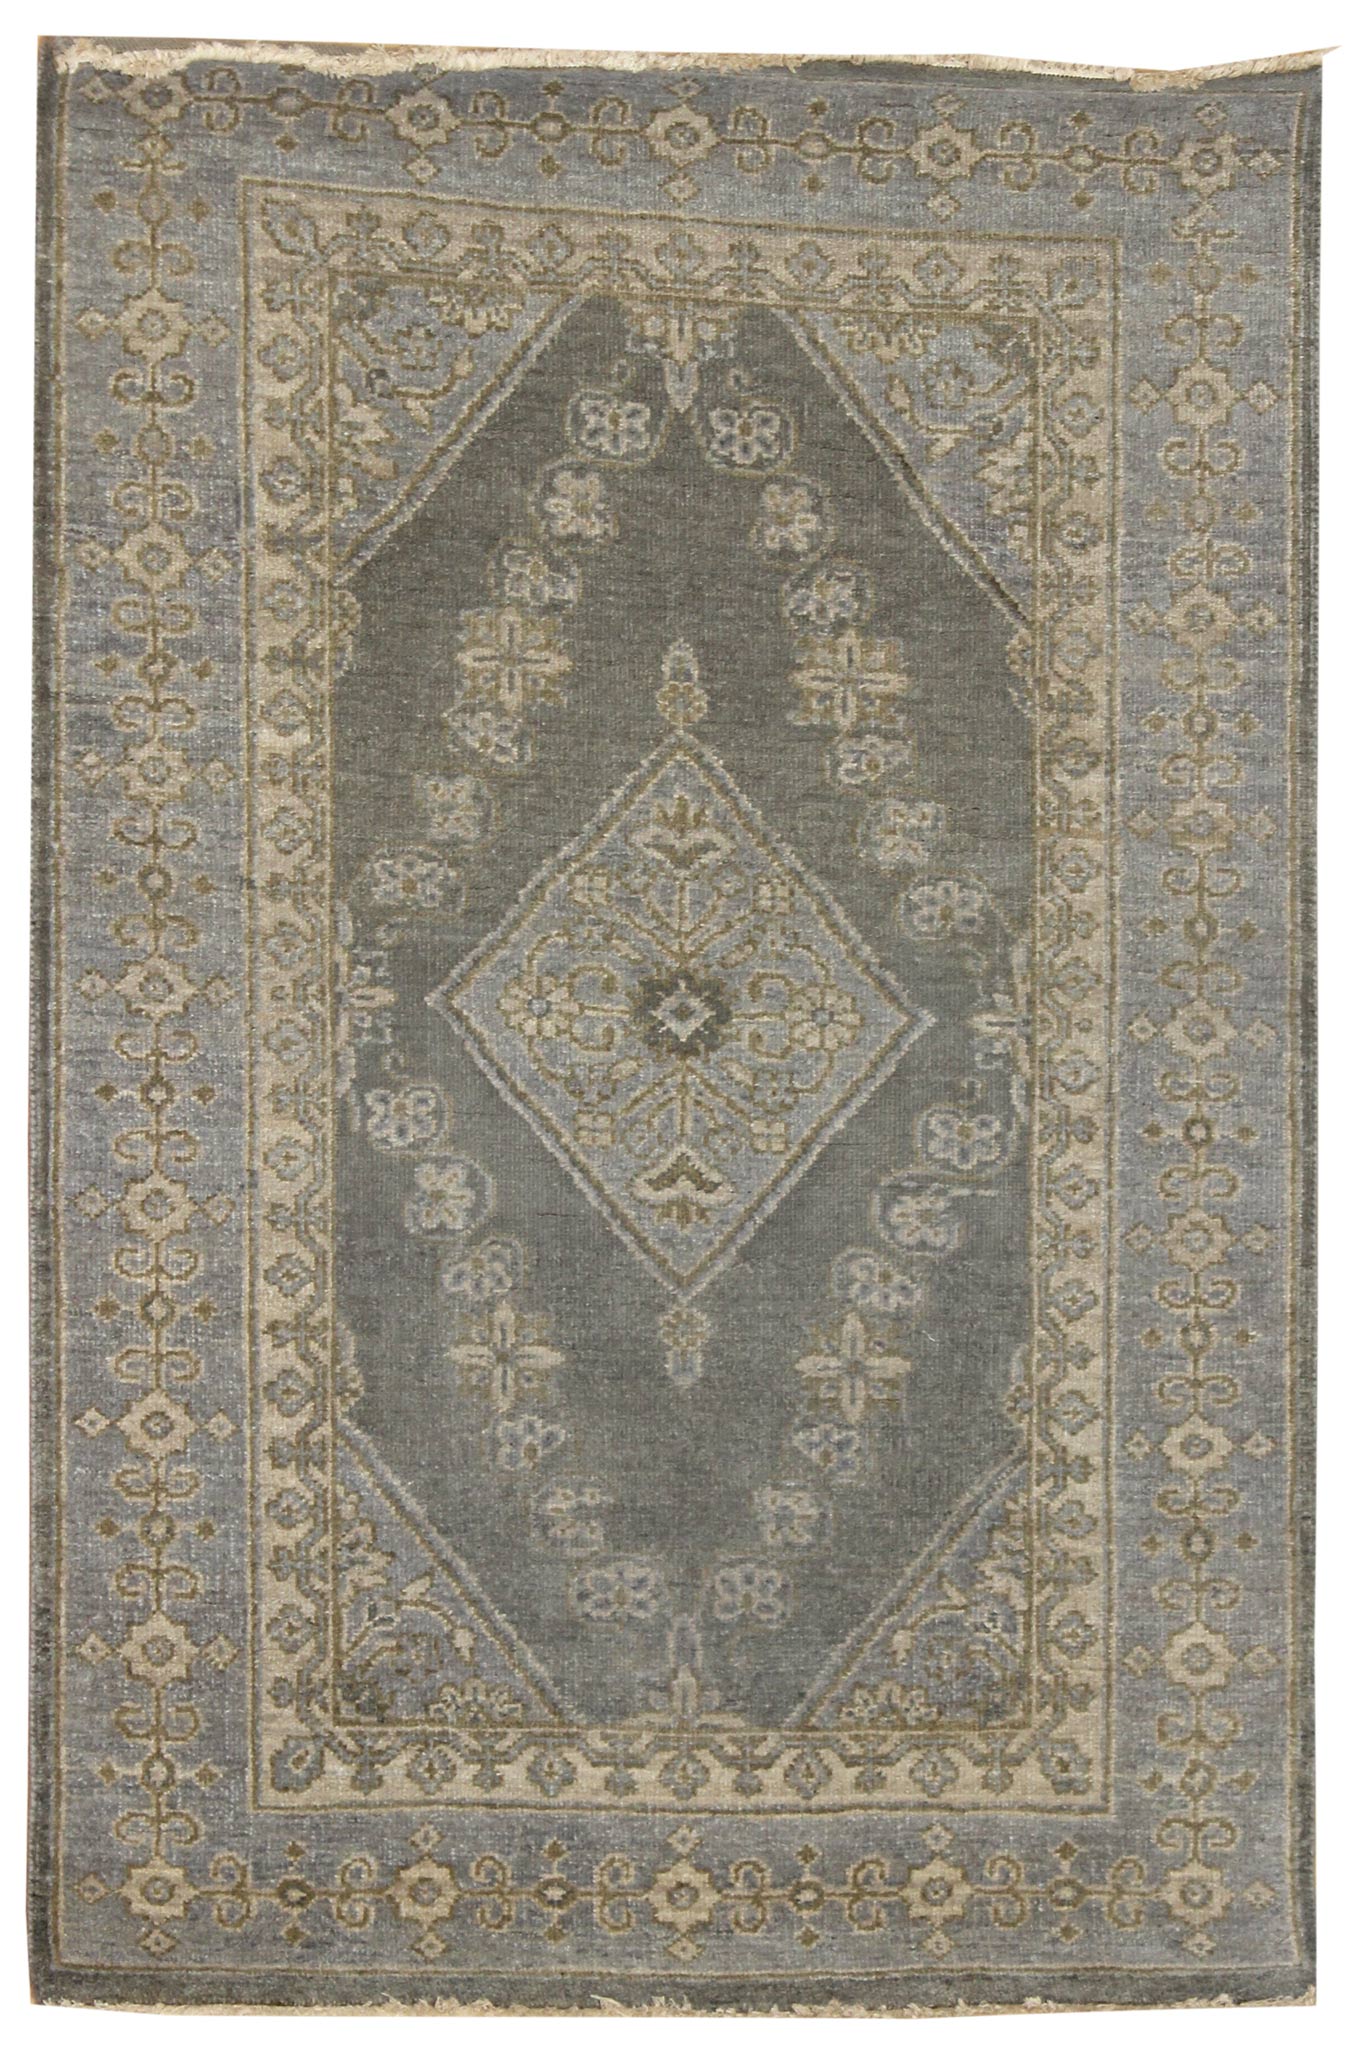 Lozenges Handwoven Transitional Rug